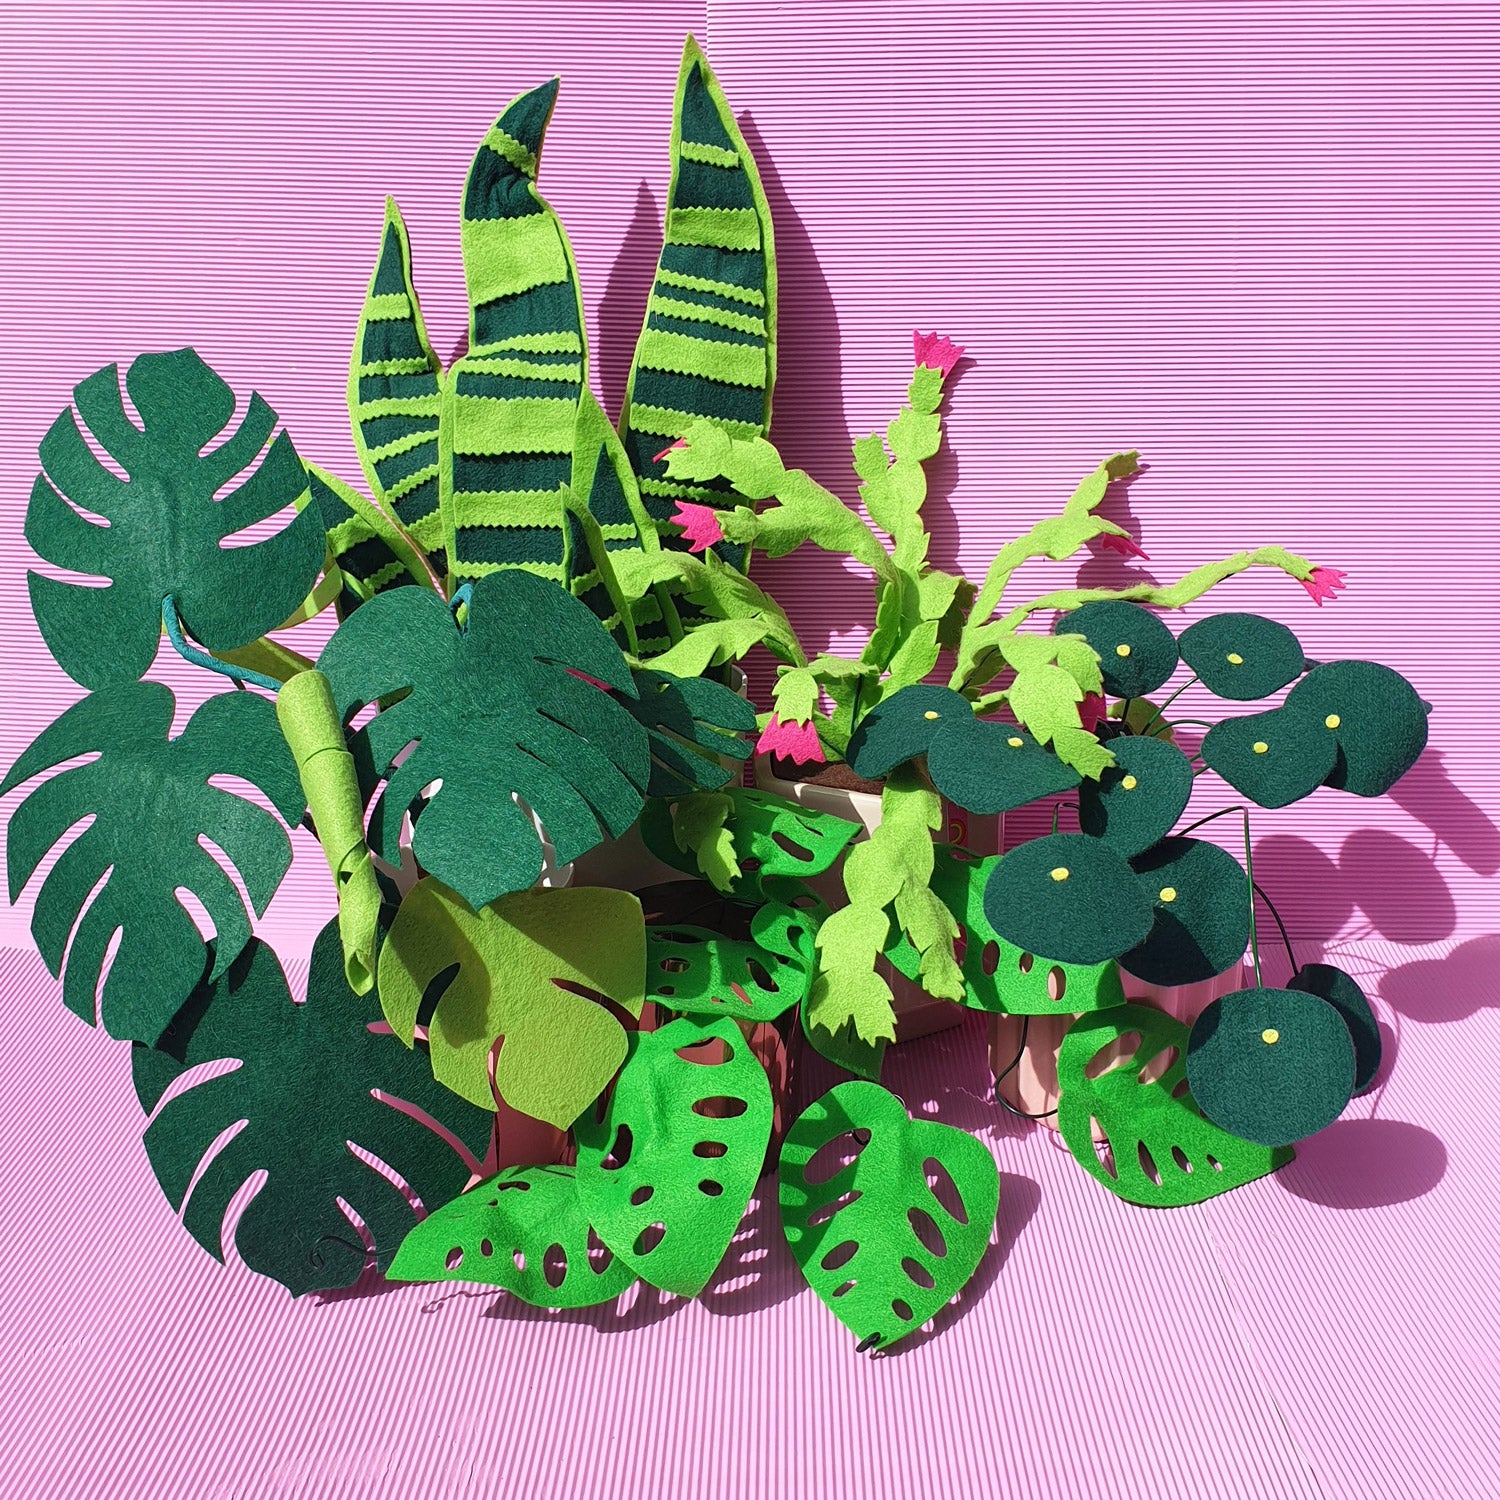 A collection of handmade felt indoor plant props in pots sit on a pink background.